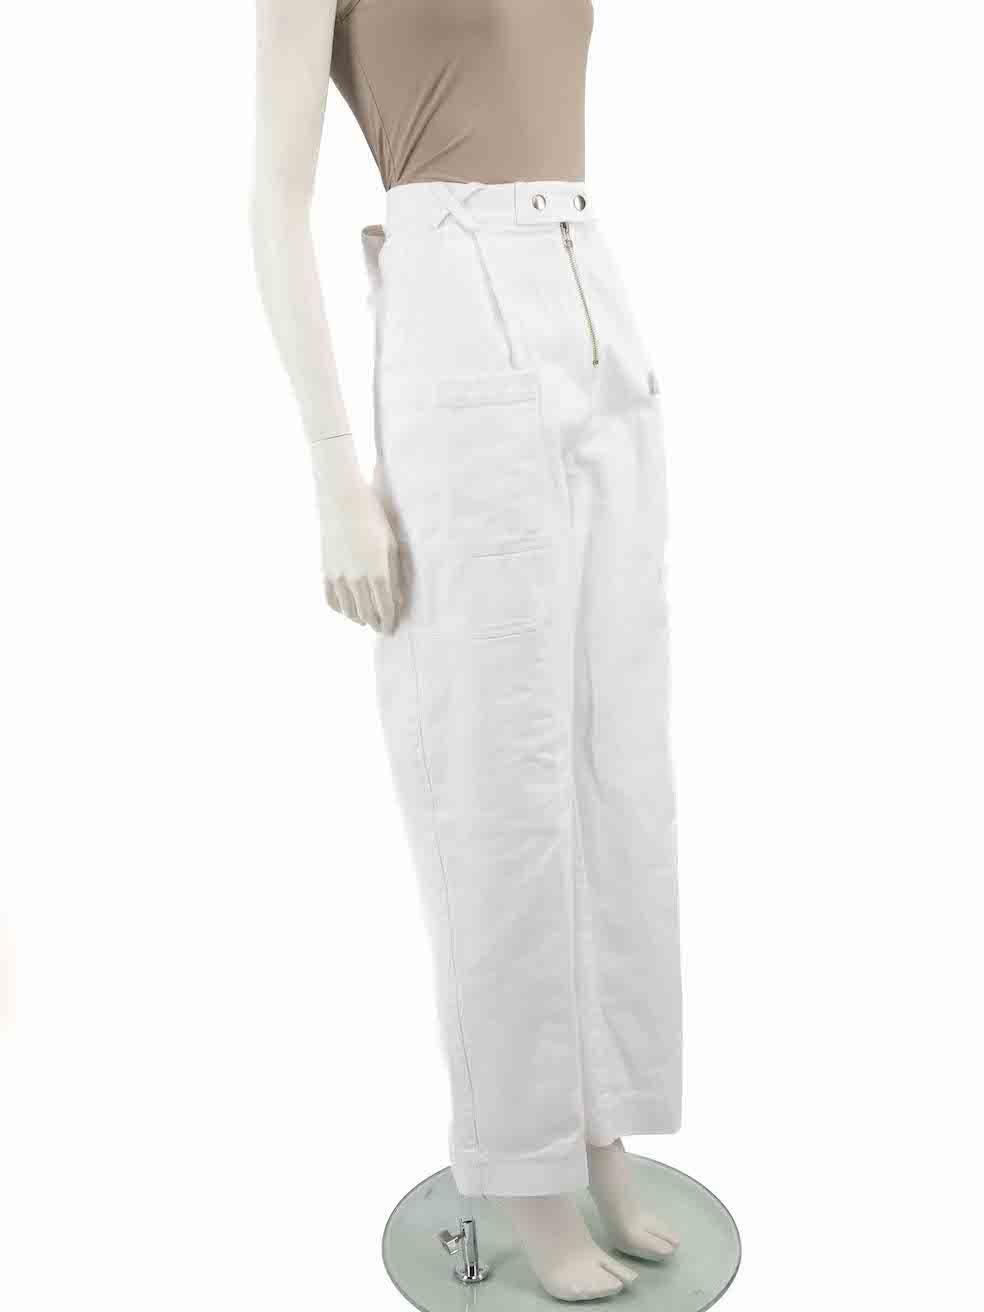 CONDITION is Good. Minor wear to trousers is evident. Light wear to the front with discoloured marks on this used Sea New York designer resale item.
 
 Details
 White
 Cotton
 Straight leg trousers
 High rise
 2x Front patch pockets
 2x Front side